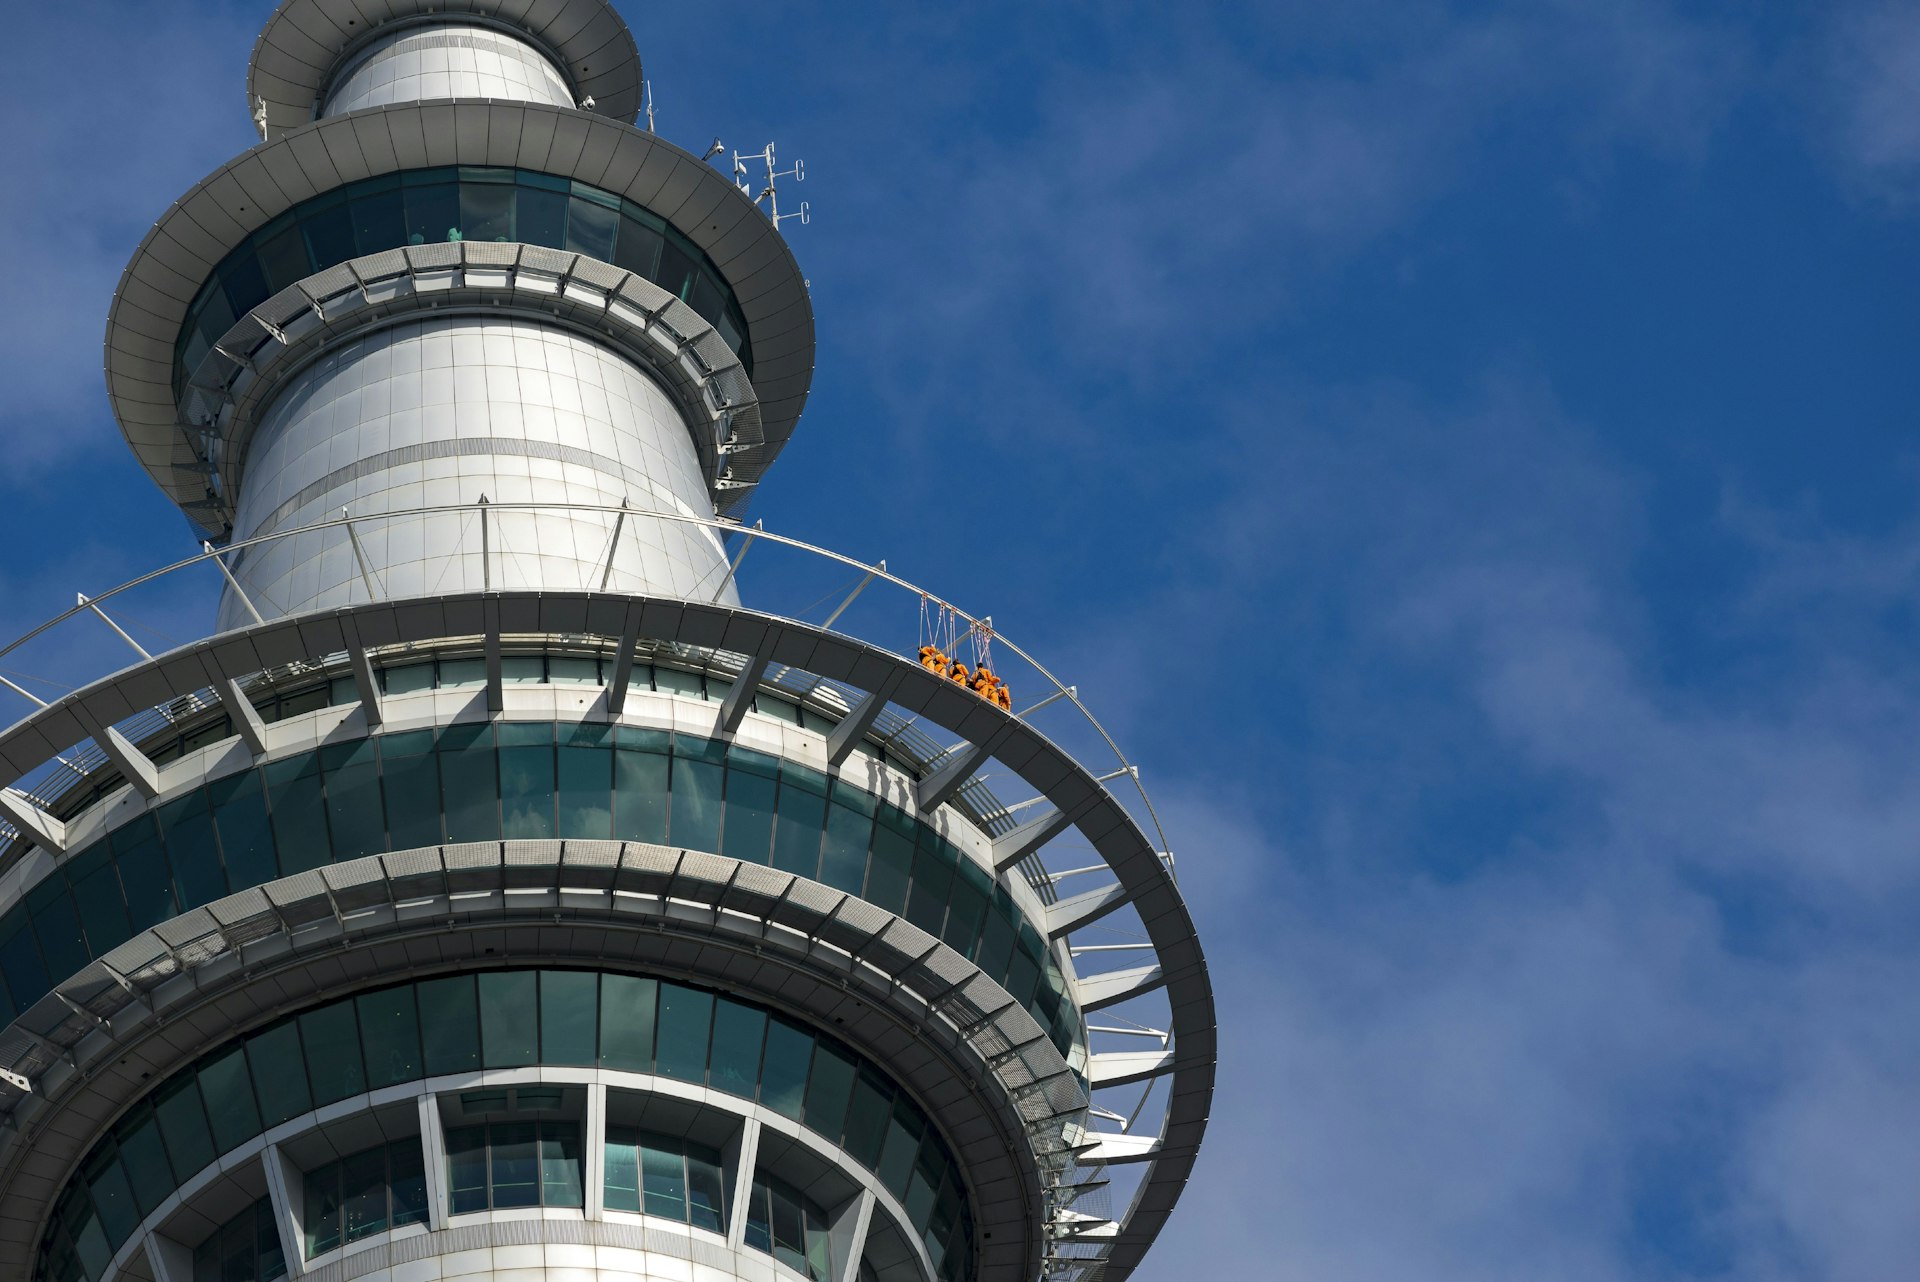 A group of people make their way around the walkway of the Sky Tower, Auckland, New Zealand © Bob Henry / UIG